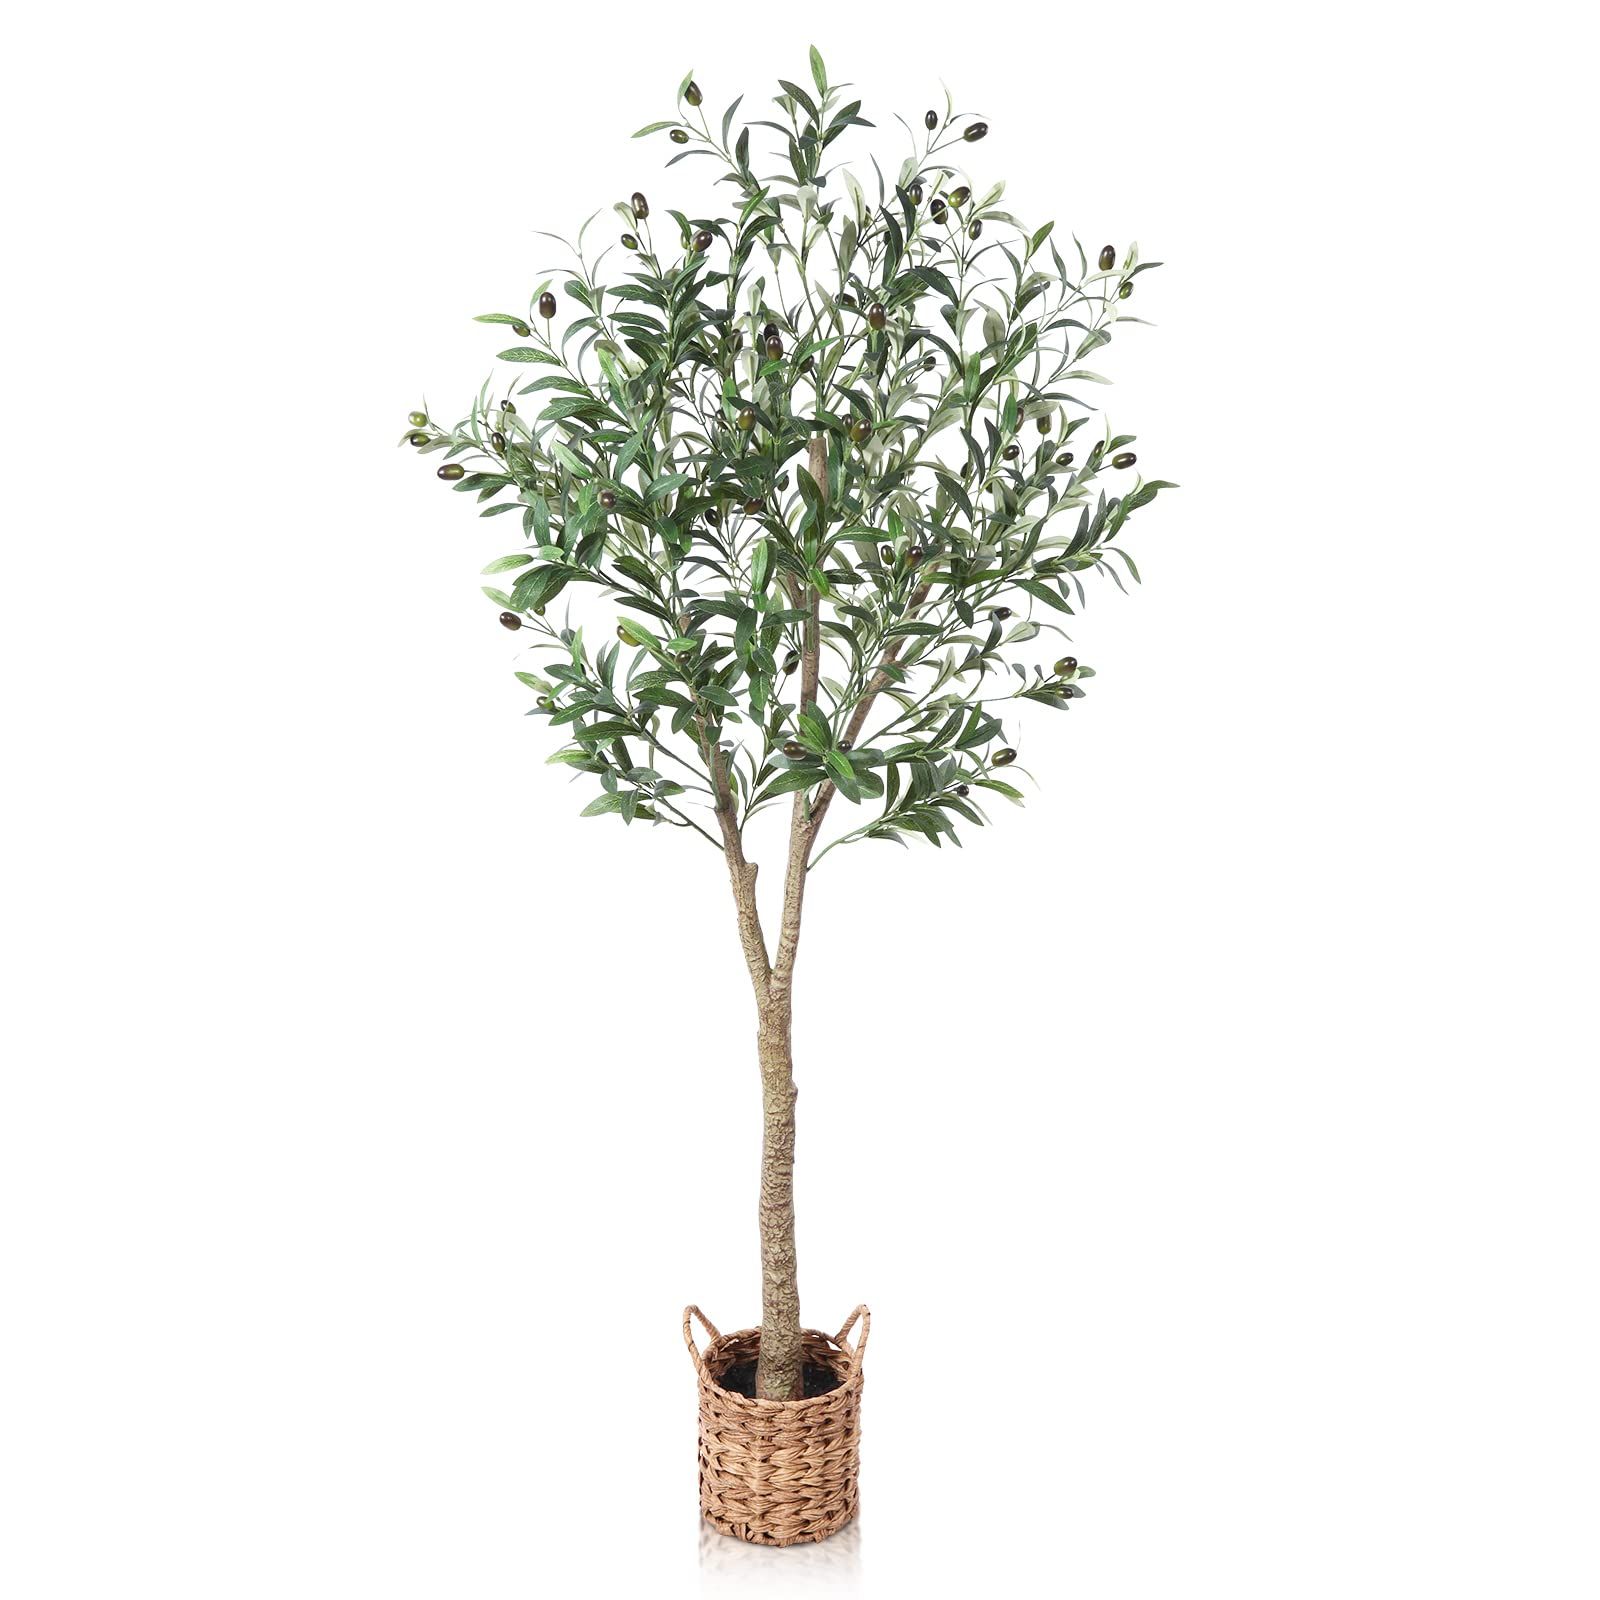 SOGUYI Artificial Olive Tree 5ft Tall Fake Plant, Faux Olive Tree Topiary Silk Trees with Handmade W | Amazon (CA)